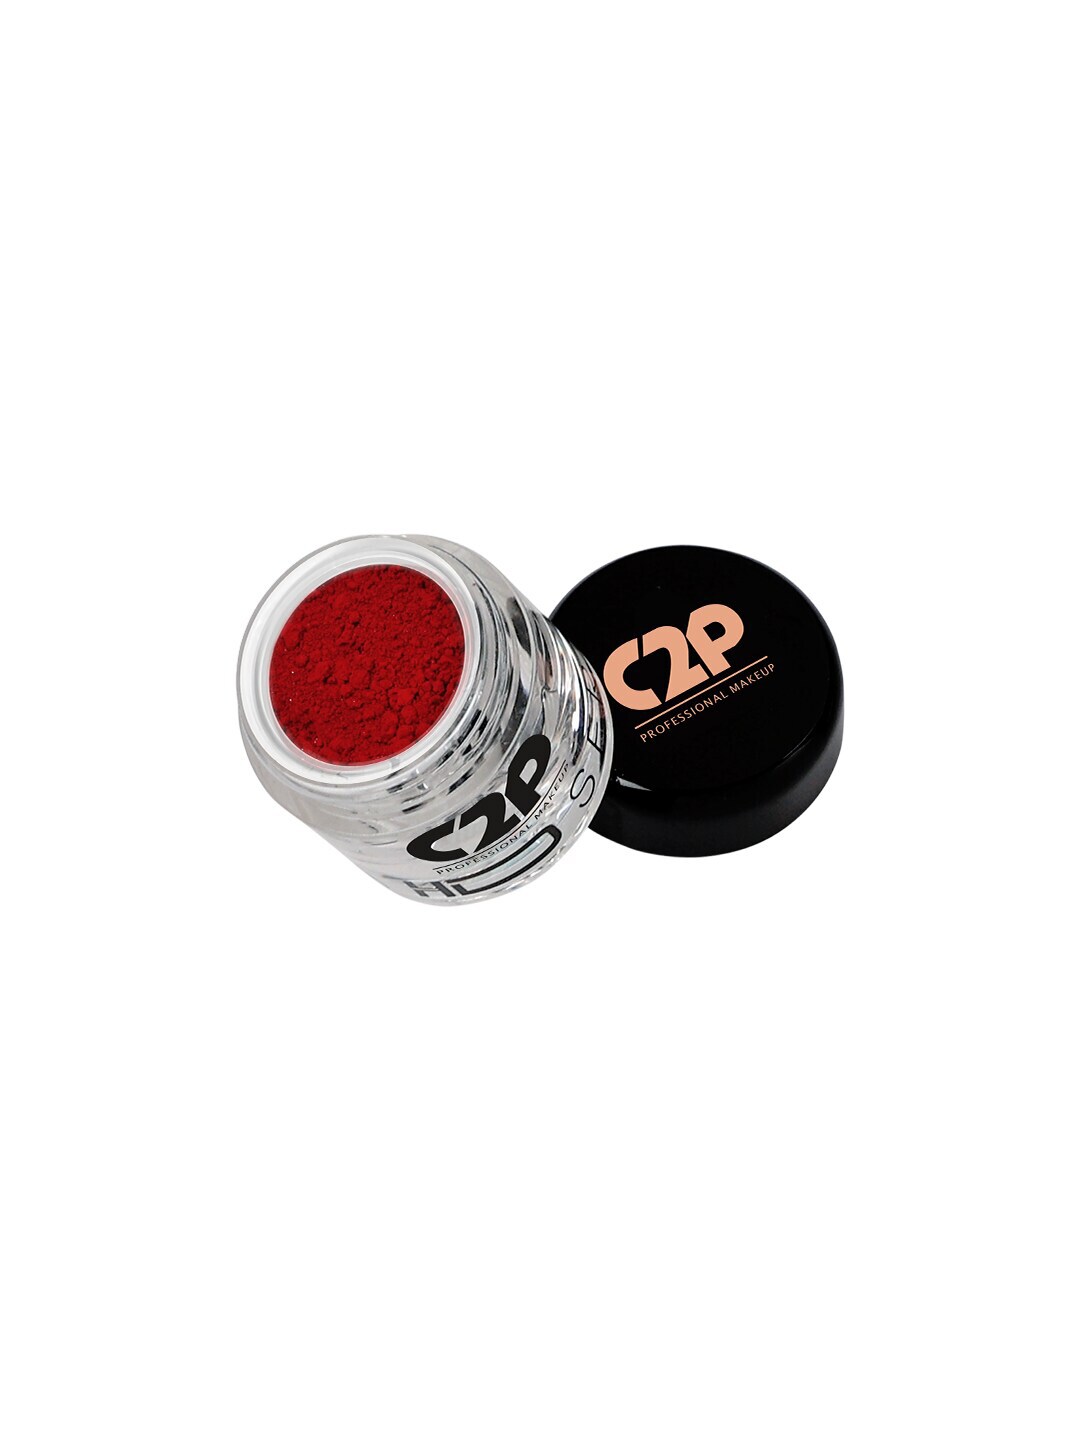 C2P PROFESSIONAL MAKEUP HD Loose Precious Pigments 2 g - Cherry Trate 89 Price in India